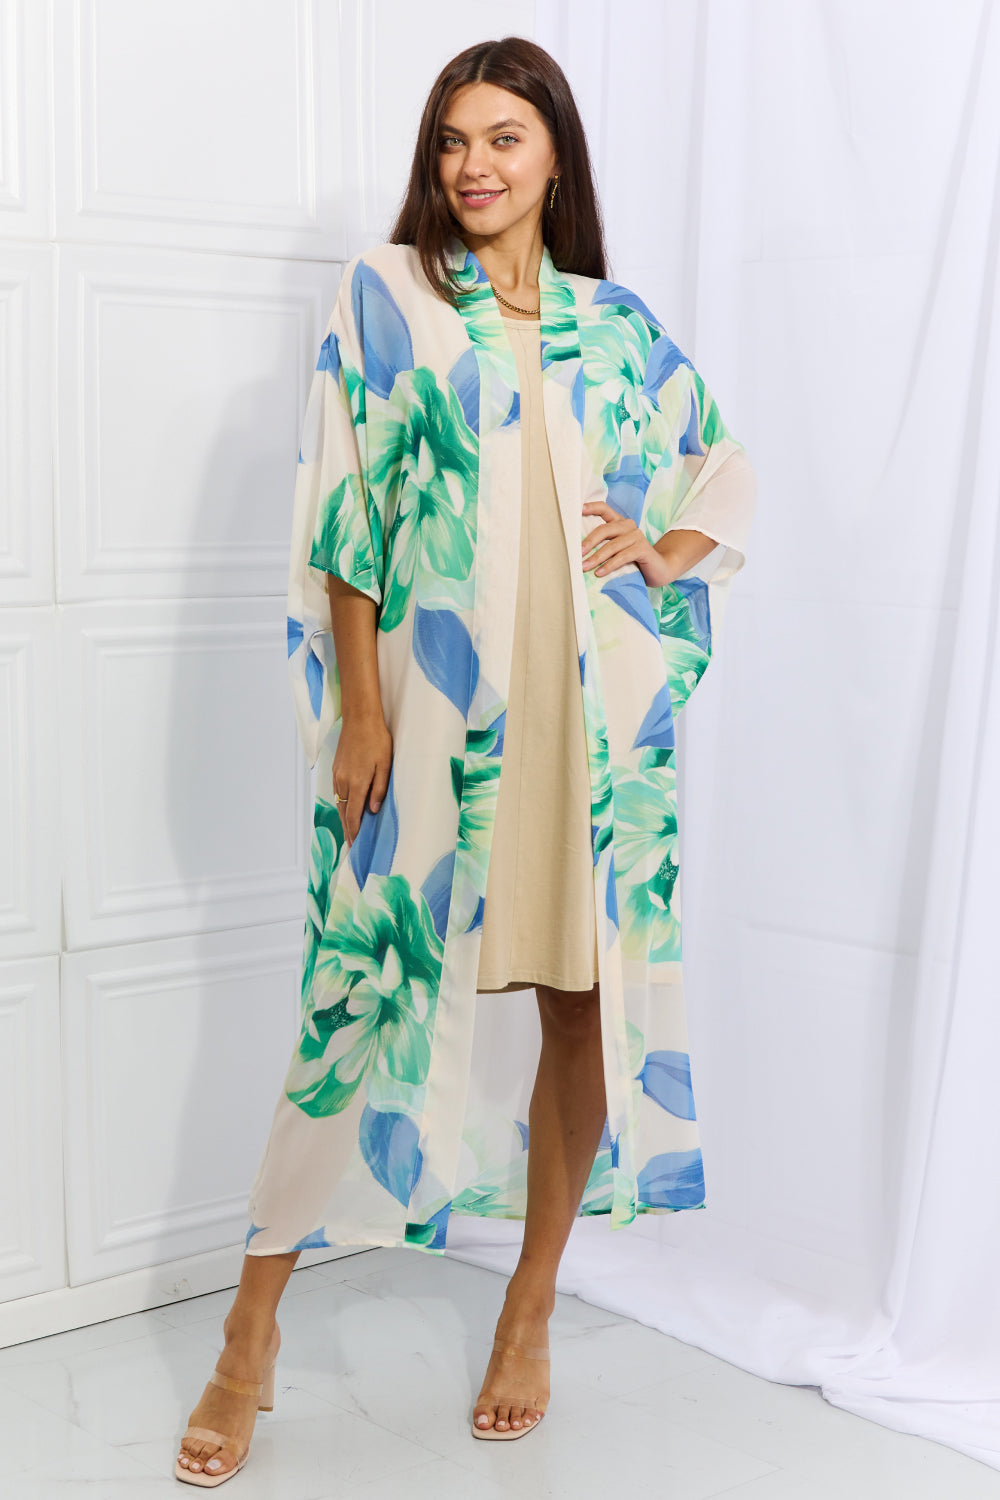 On the Go Floral Kimono - Coco and lulu boutique 